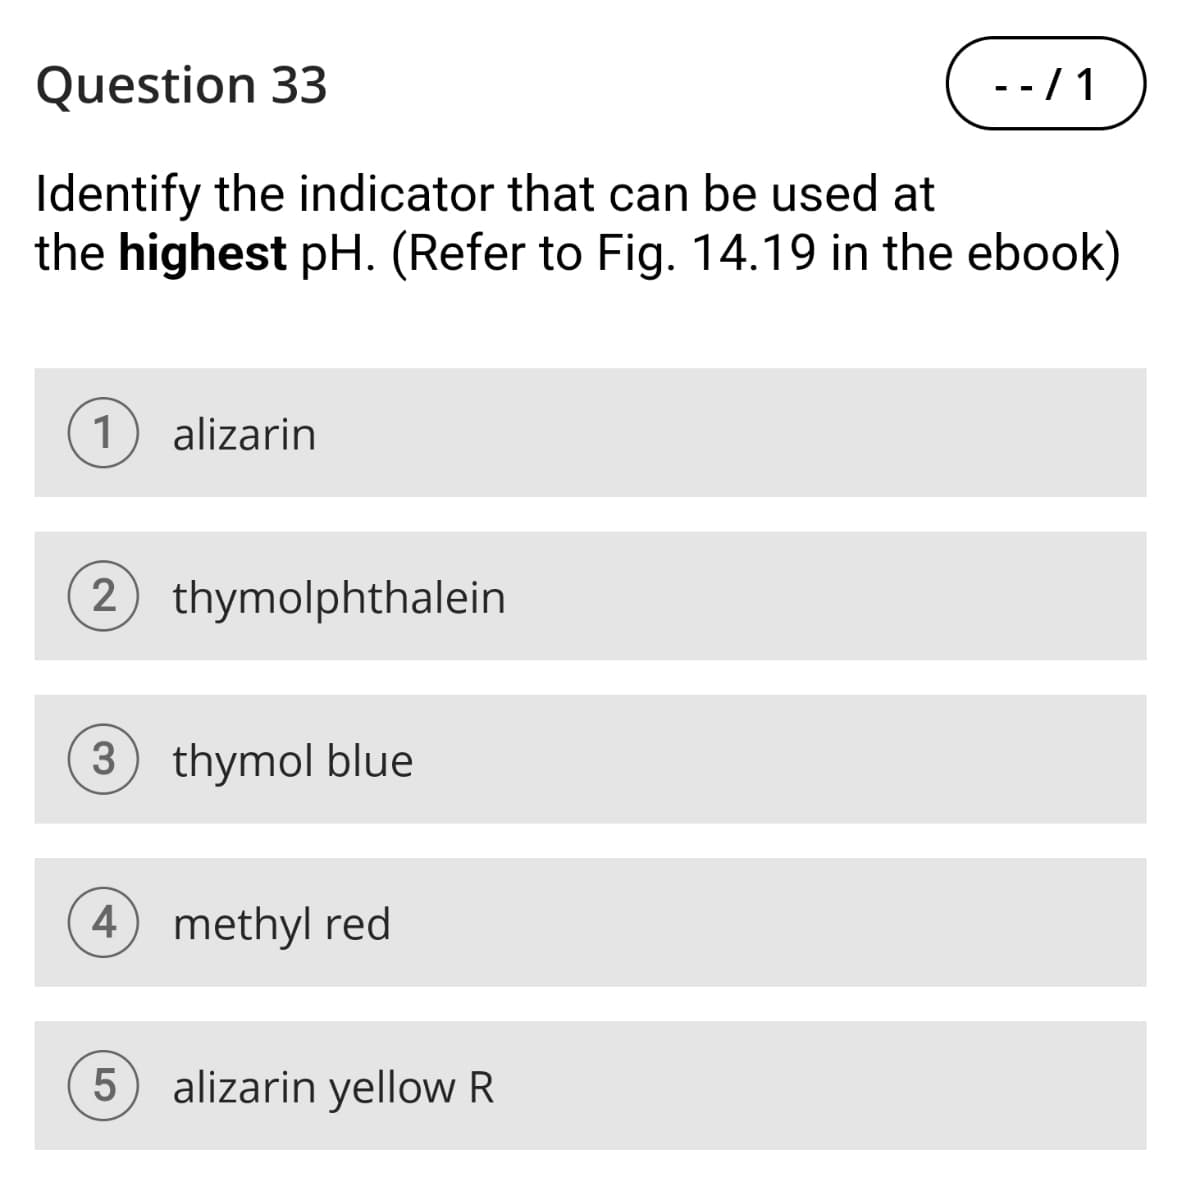 Question 33
Identify the indicator that can be used at
- -/1
the highest pH. (Refer to Fig. 14.19 in the ebook)
1
alizarin
2
thymolphthalein
3 thymol blue
4 methyl red
5
alizarin yellow R